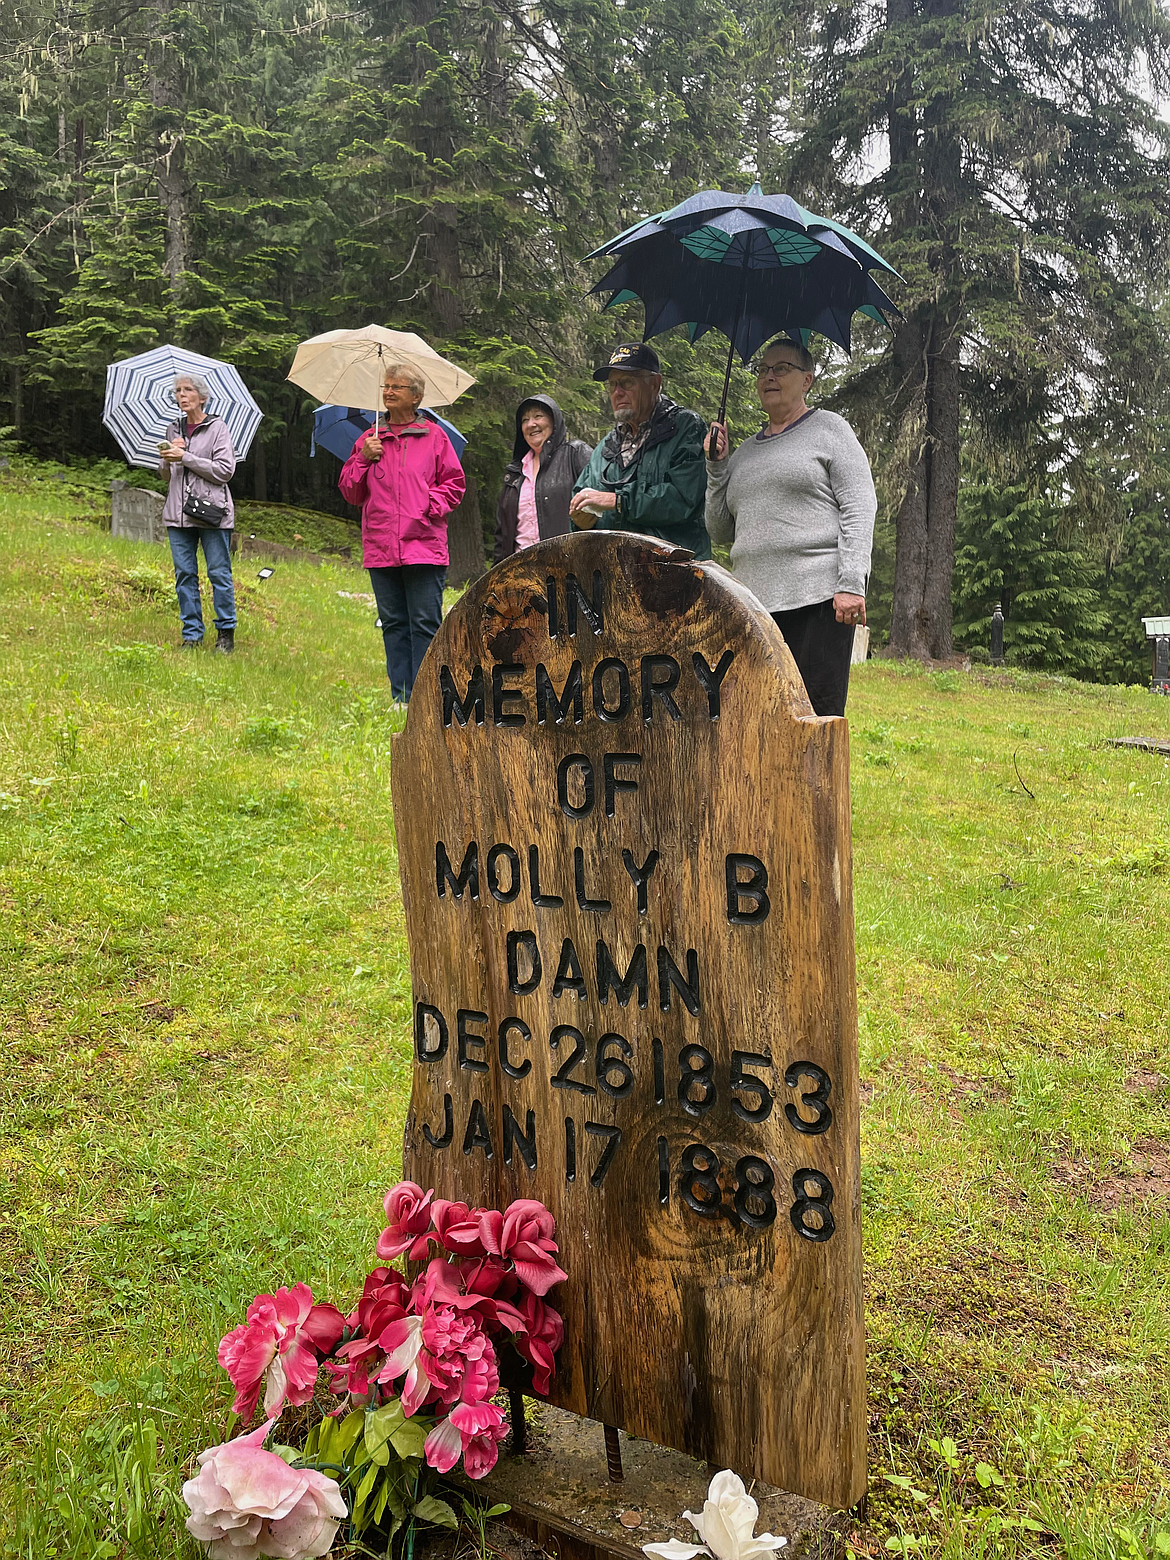 The grave of Molly B'Damn is pictured here at GAR Murray Cemetery in Shoshone County.